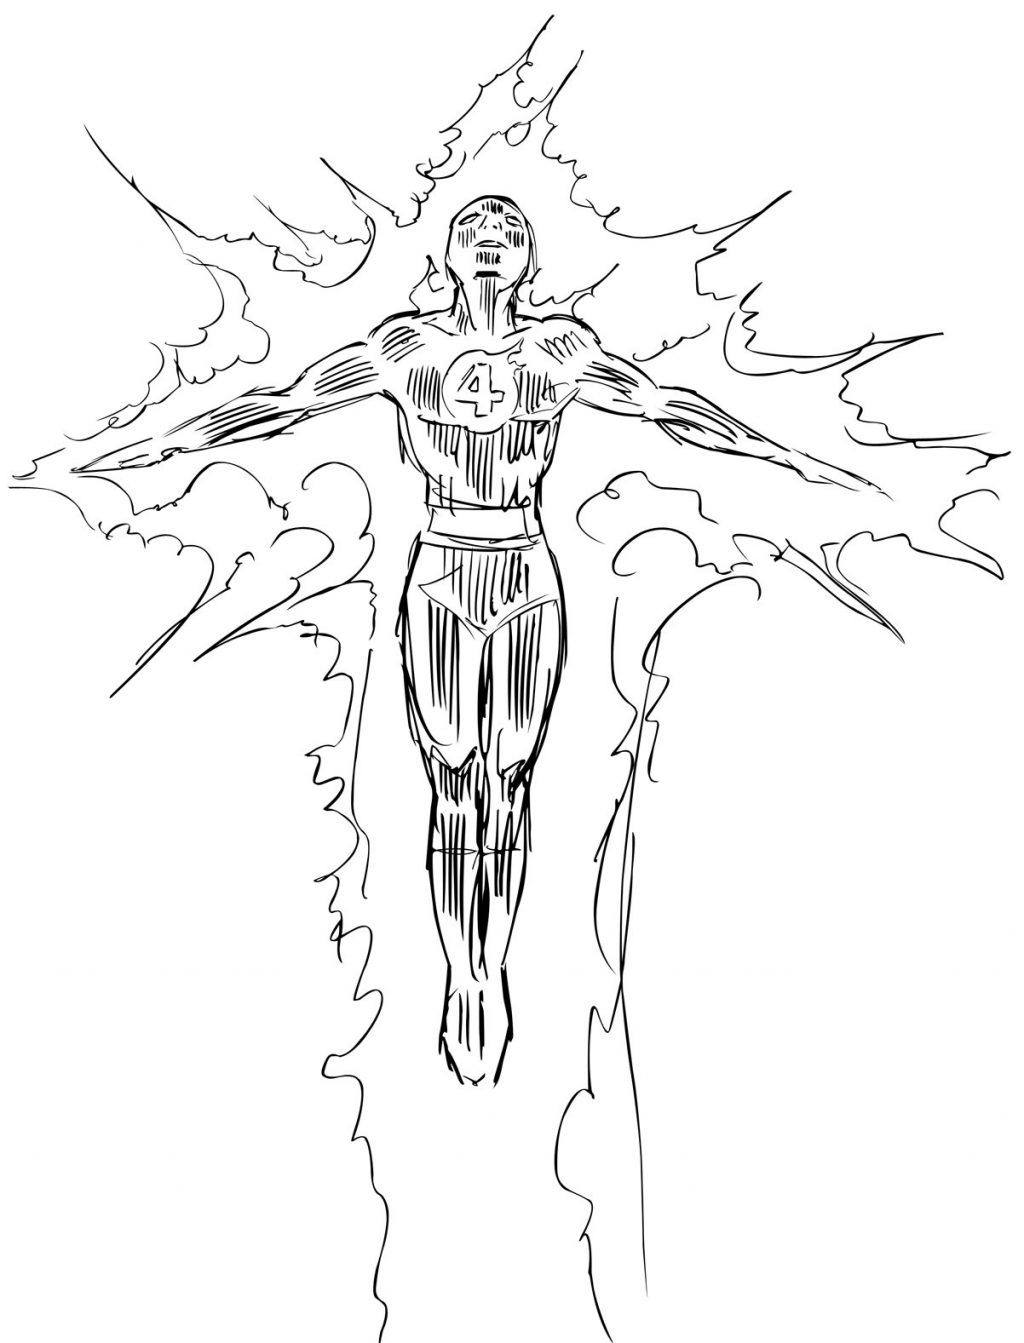 Human Torch Coloring Page at GetColorings.com | Free printable